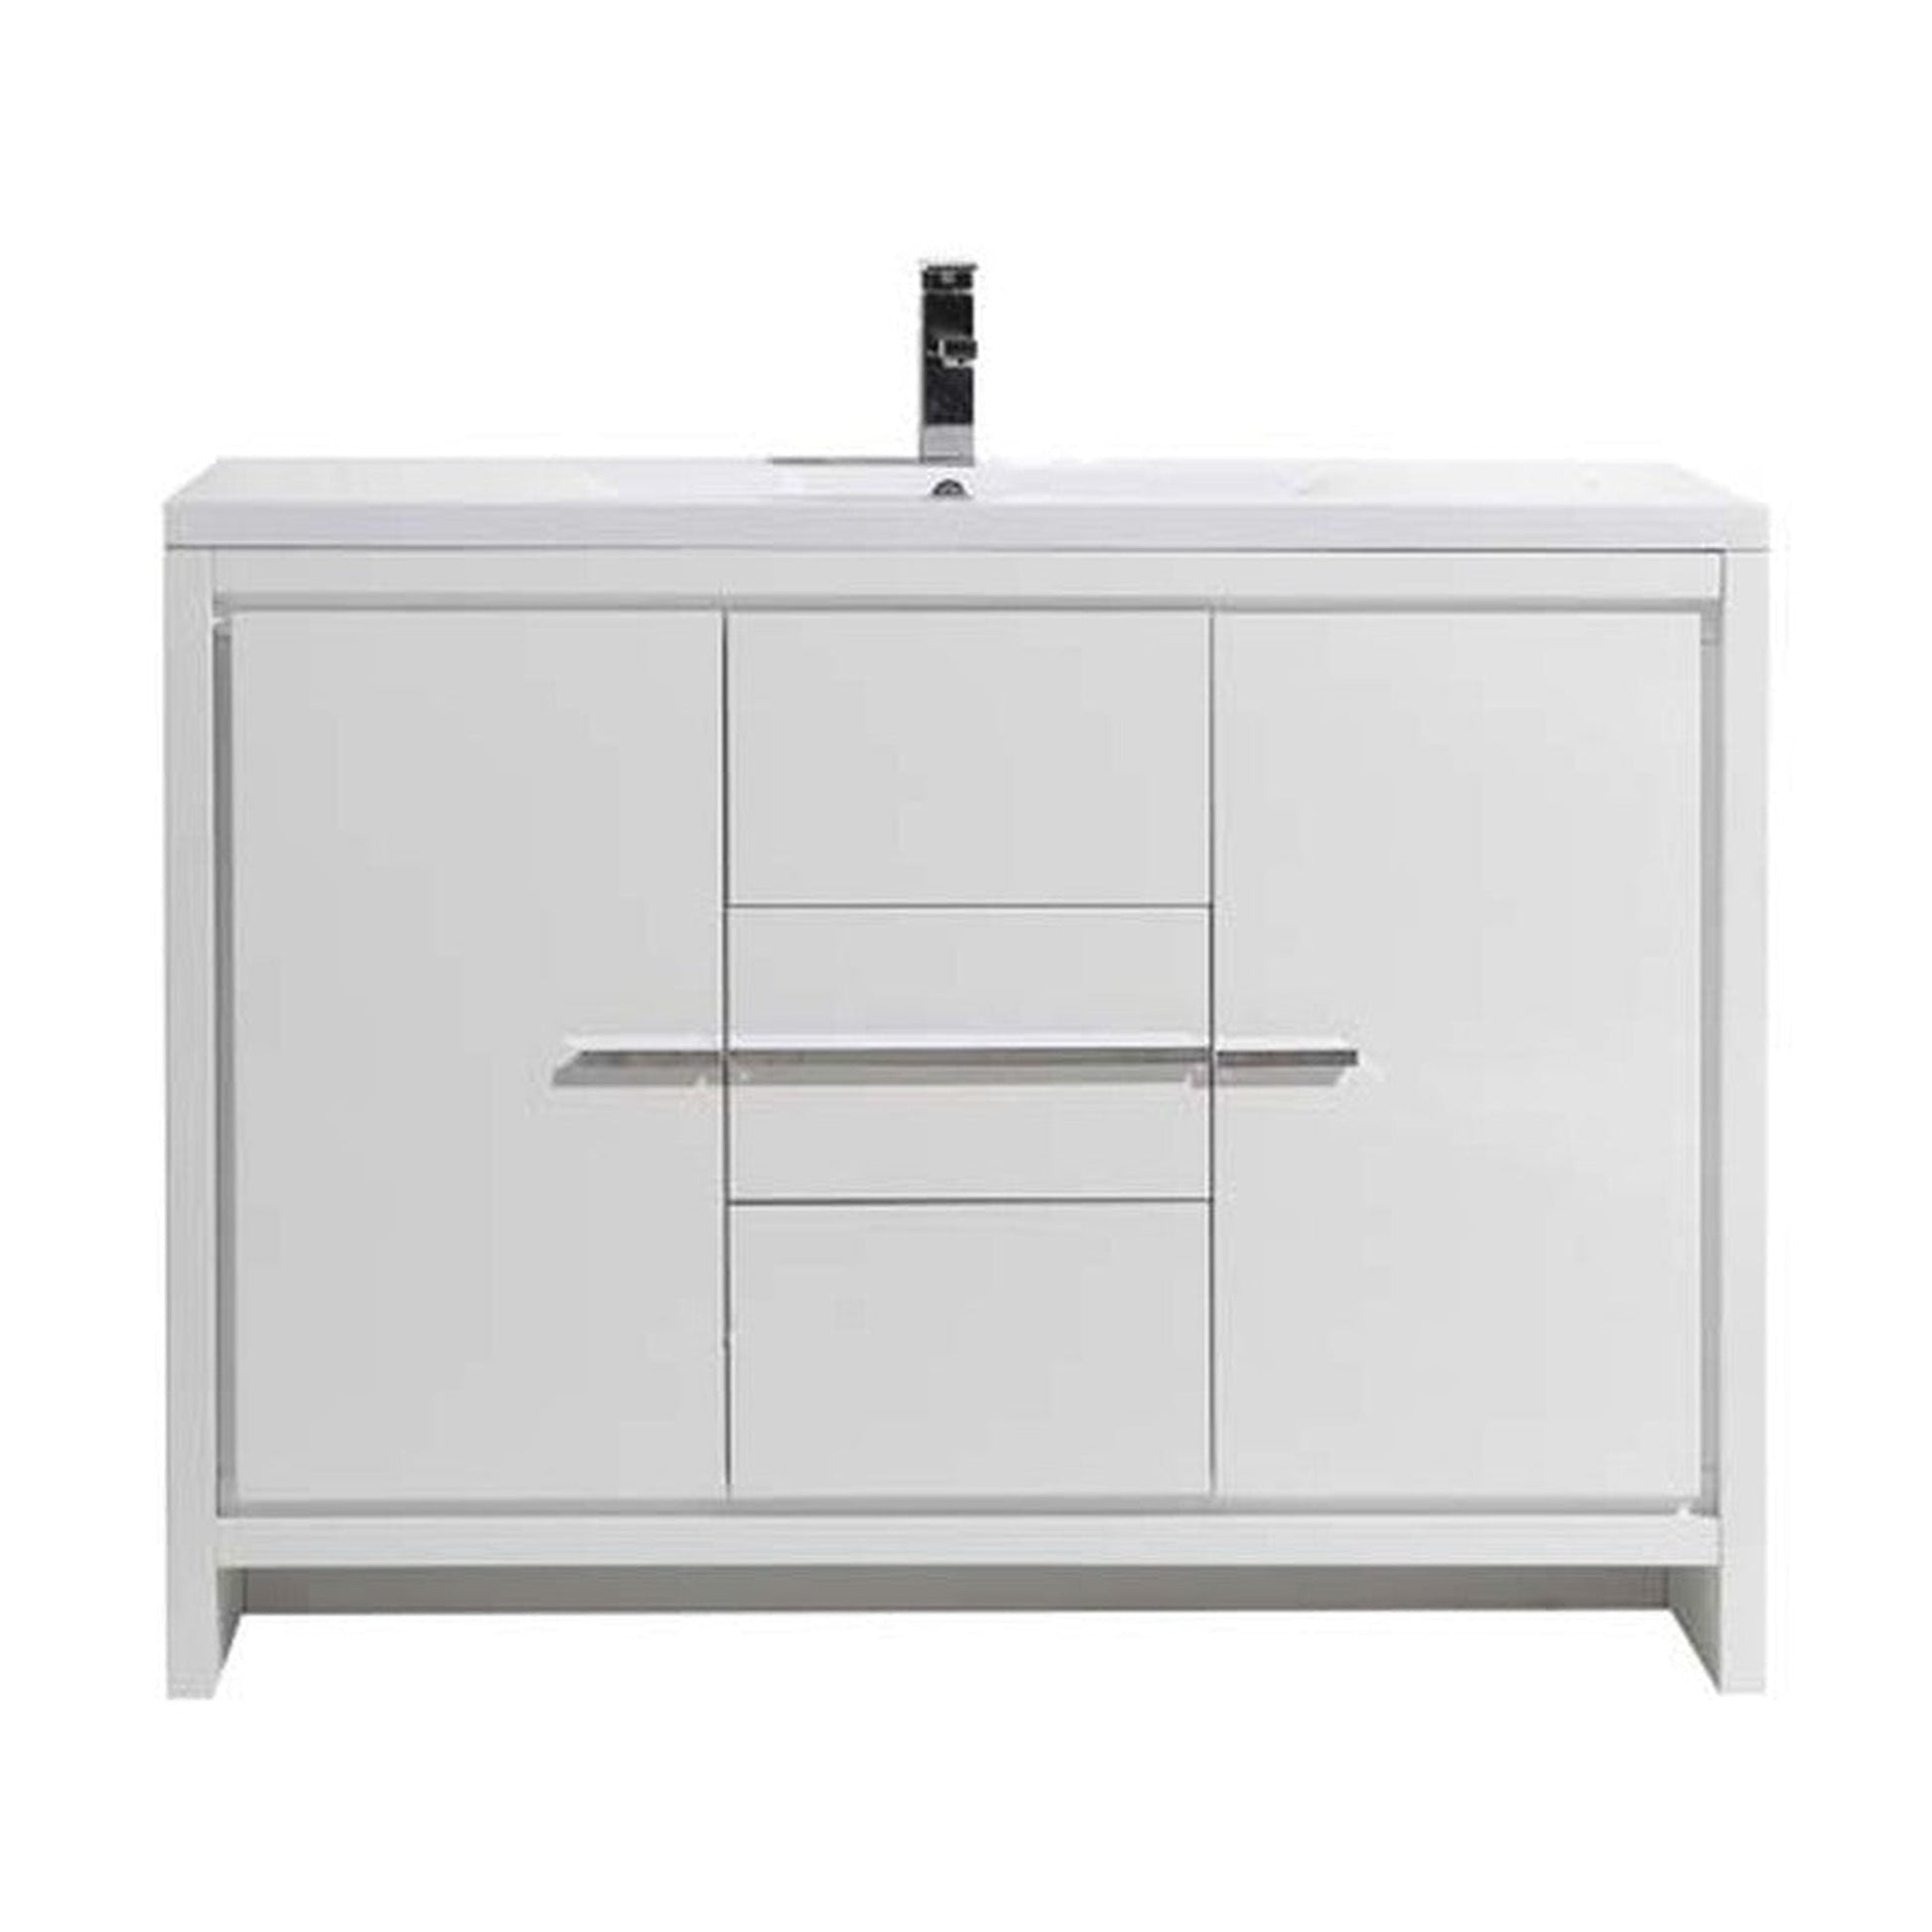 Moreno Bath Dolce 48" High Gloss White Freestanding Vanity With Single Reinforced White Acrylic Sink